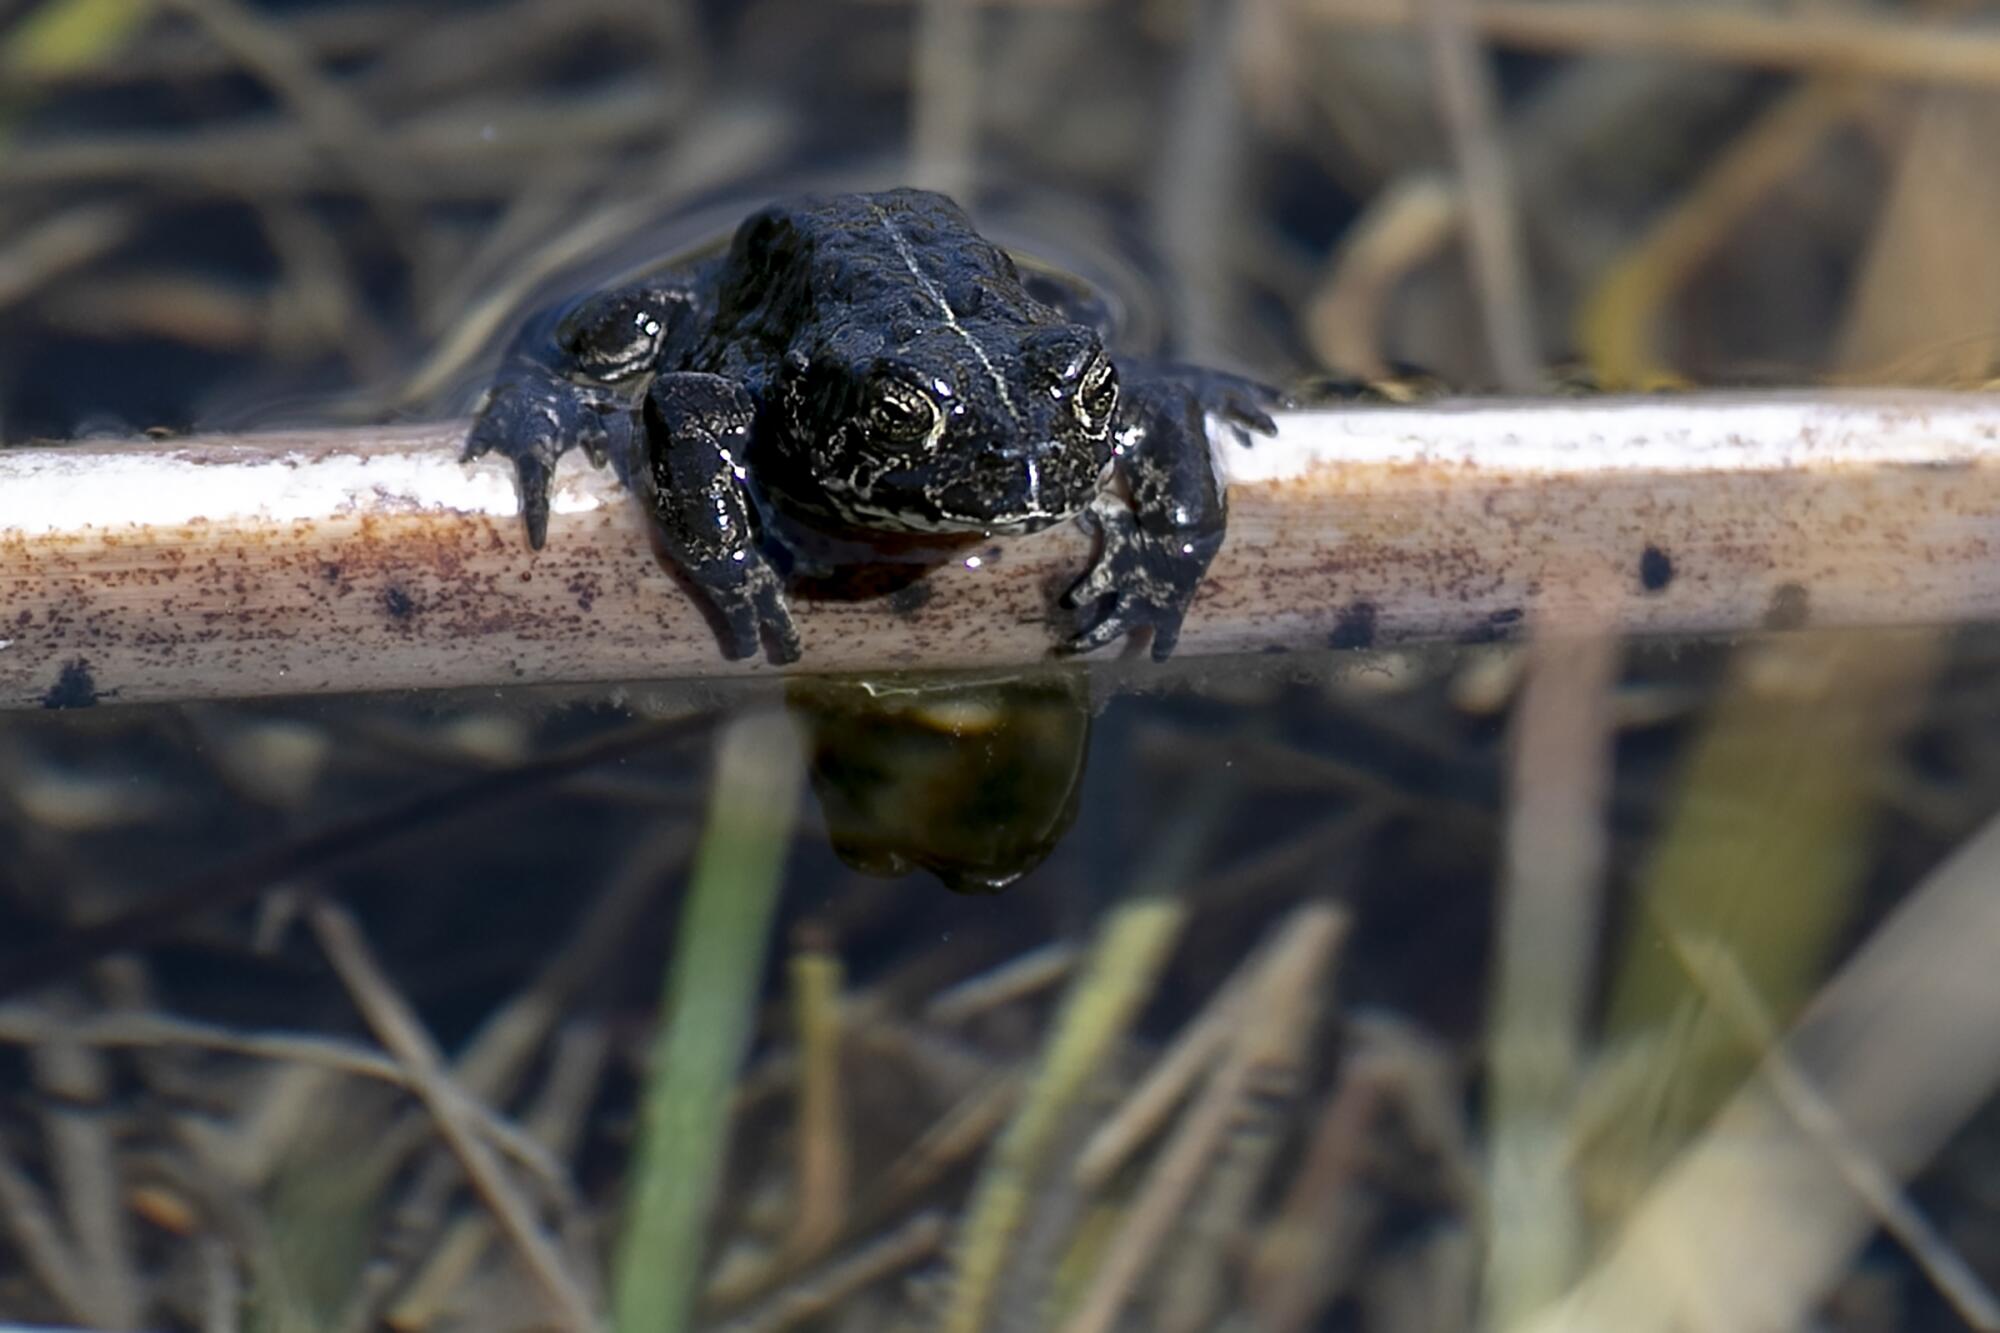 A black toad perched in its habitat on the Valley Springs College campus